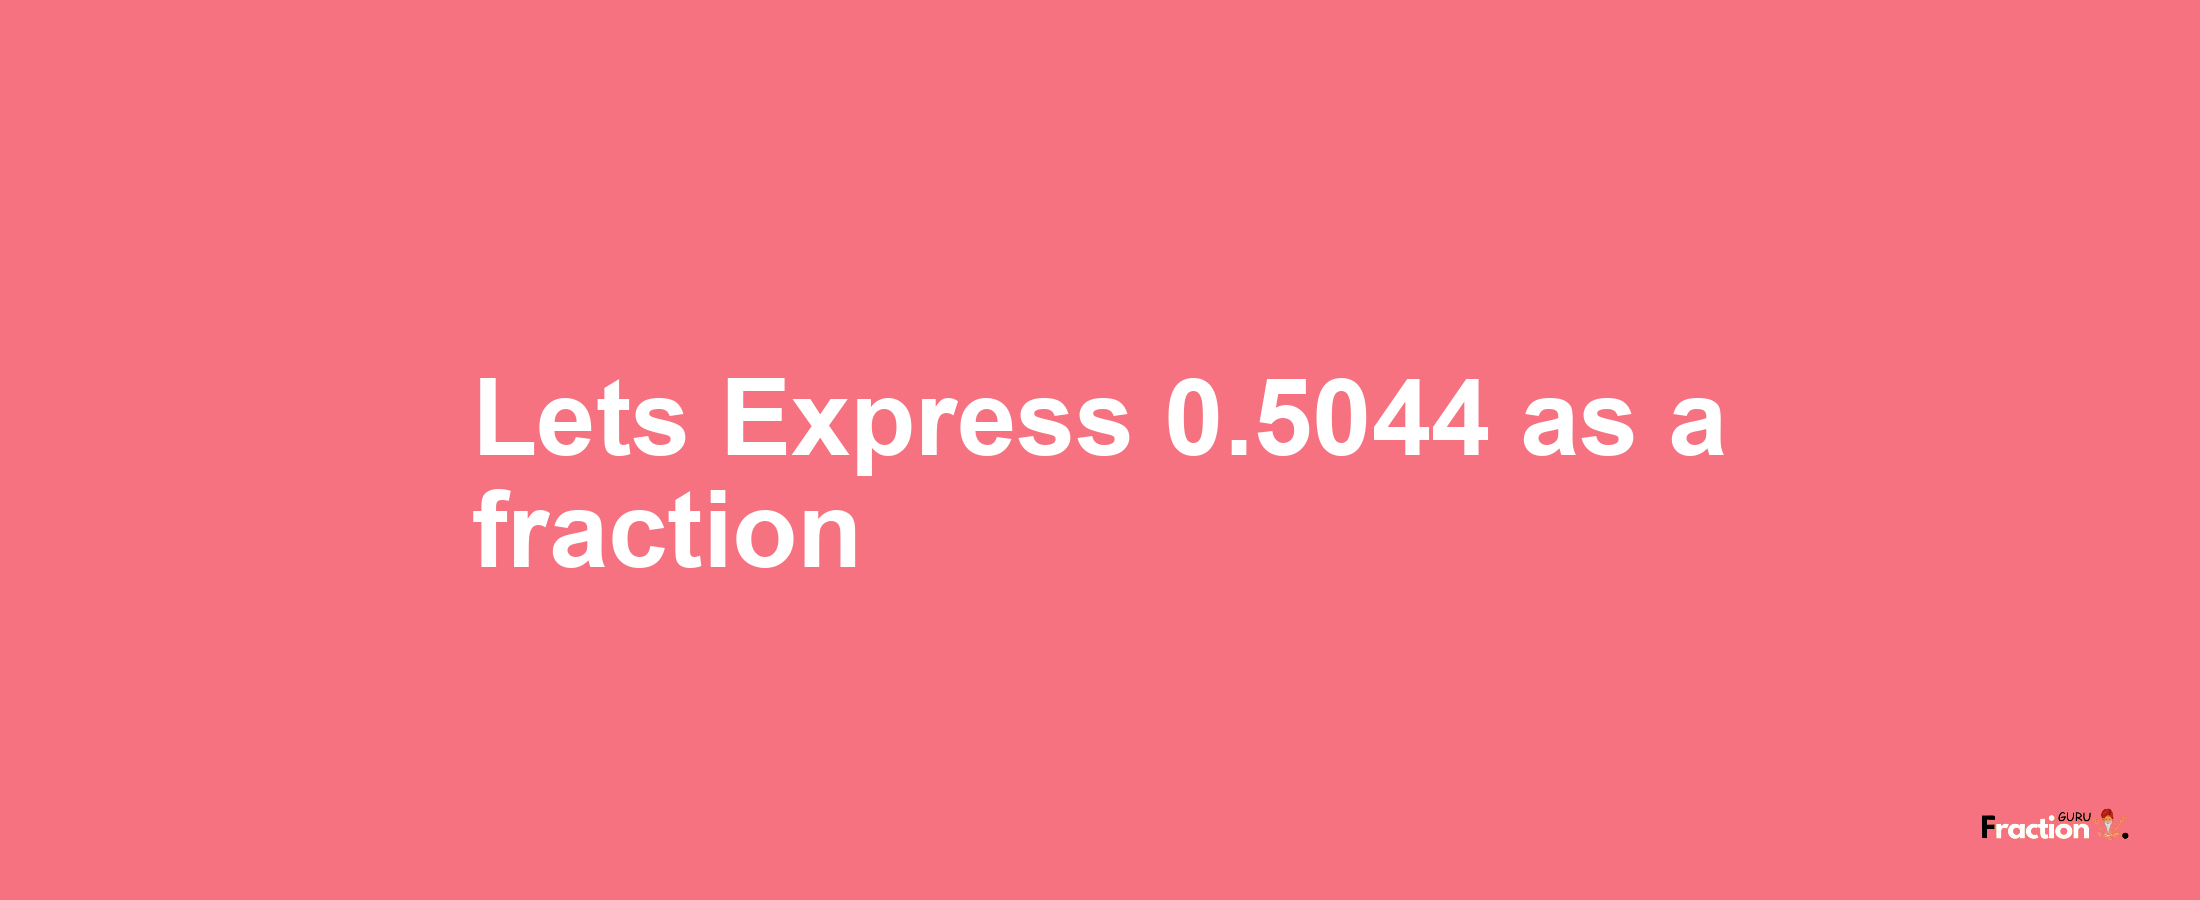 Lets Express 0.5044 as afraction